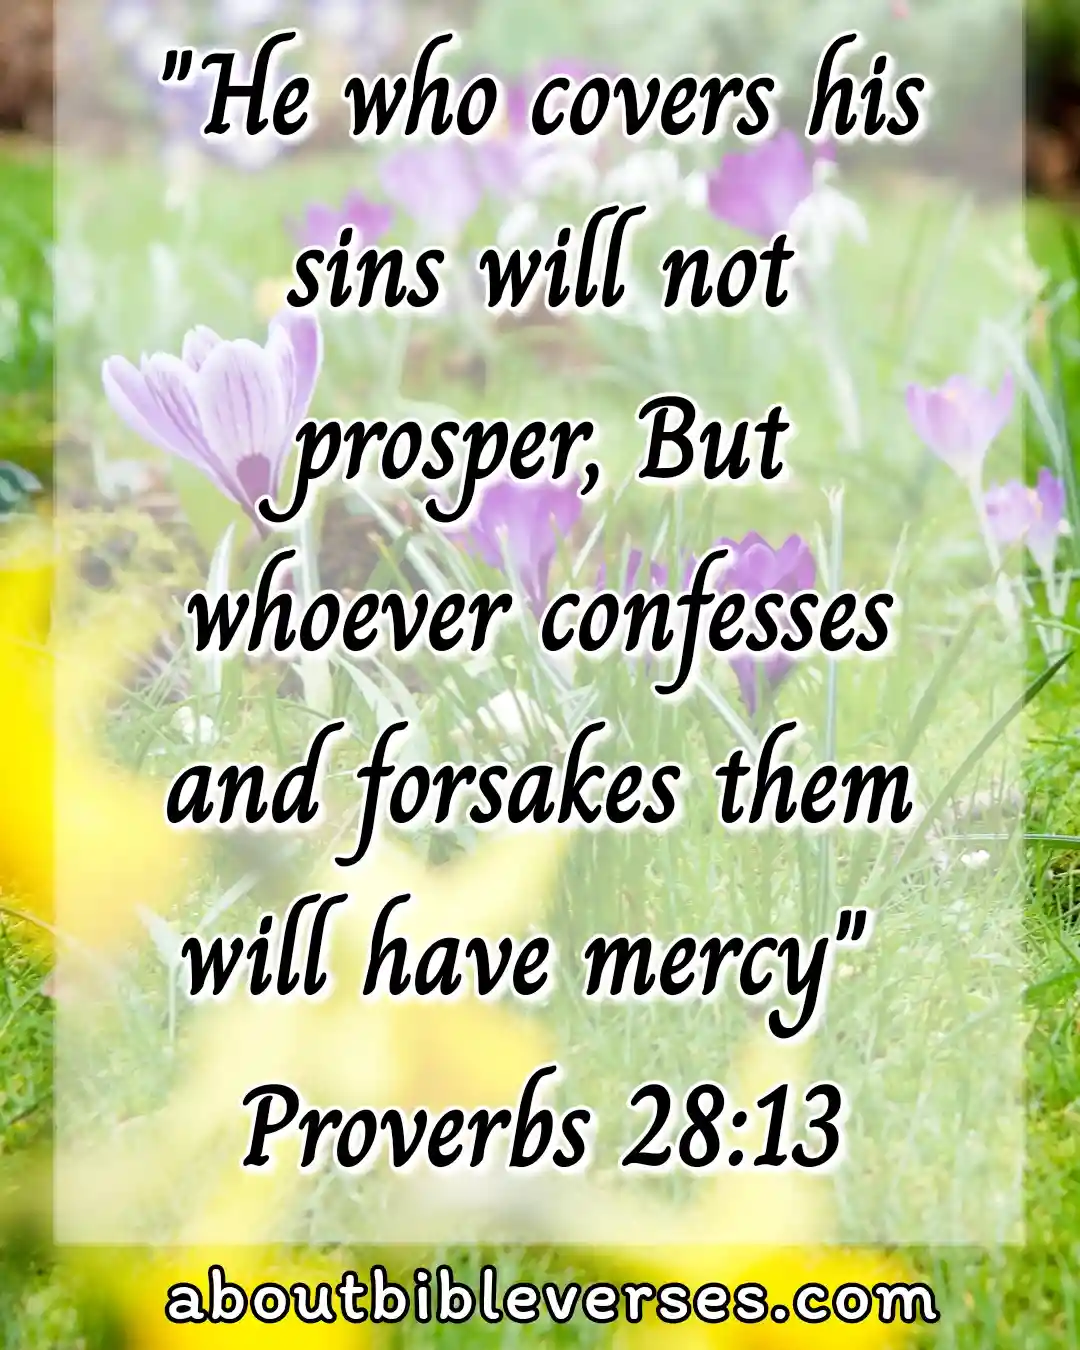 Bible Verses For Repentance And Forgiveness (Proverbs 28:13)